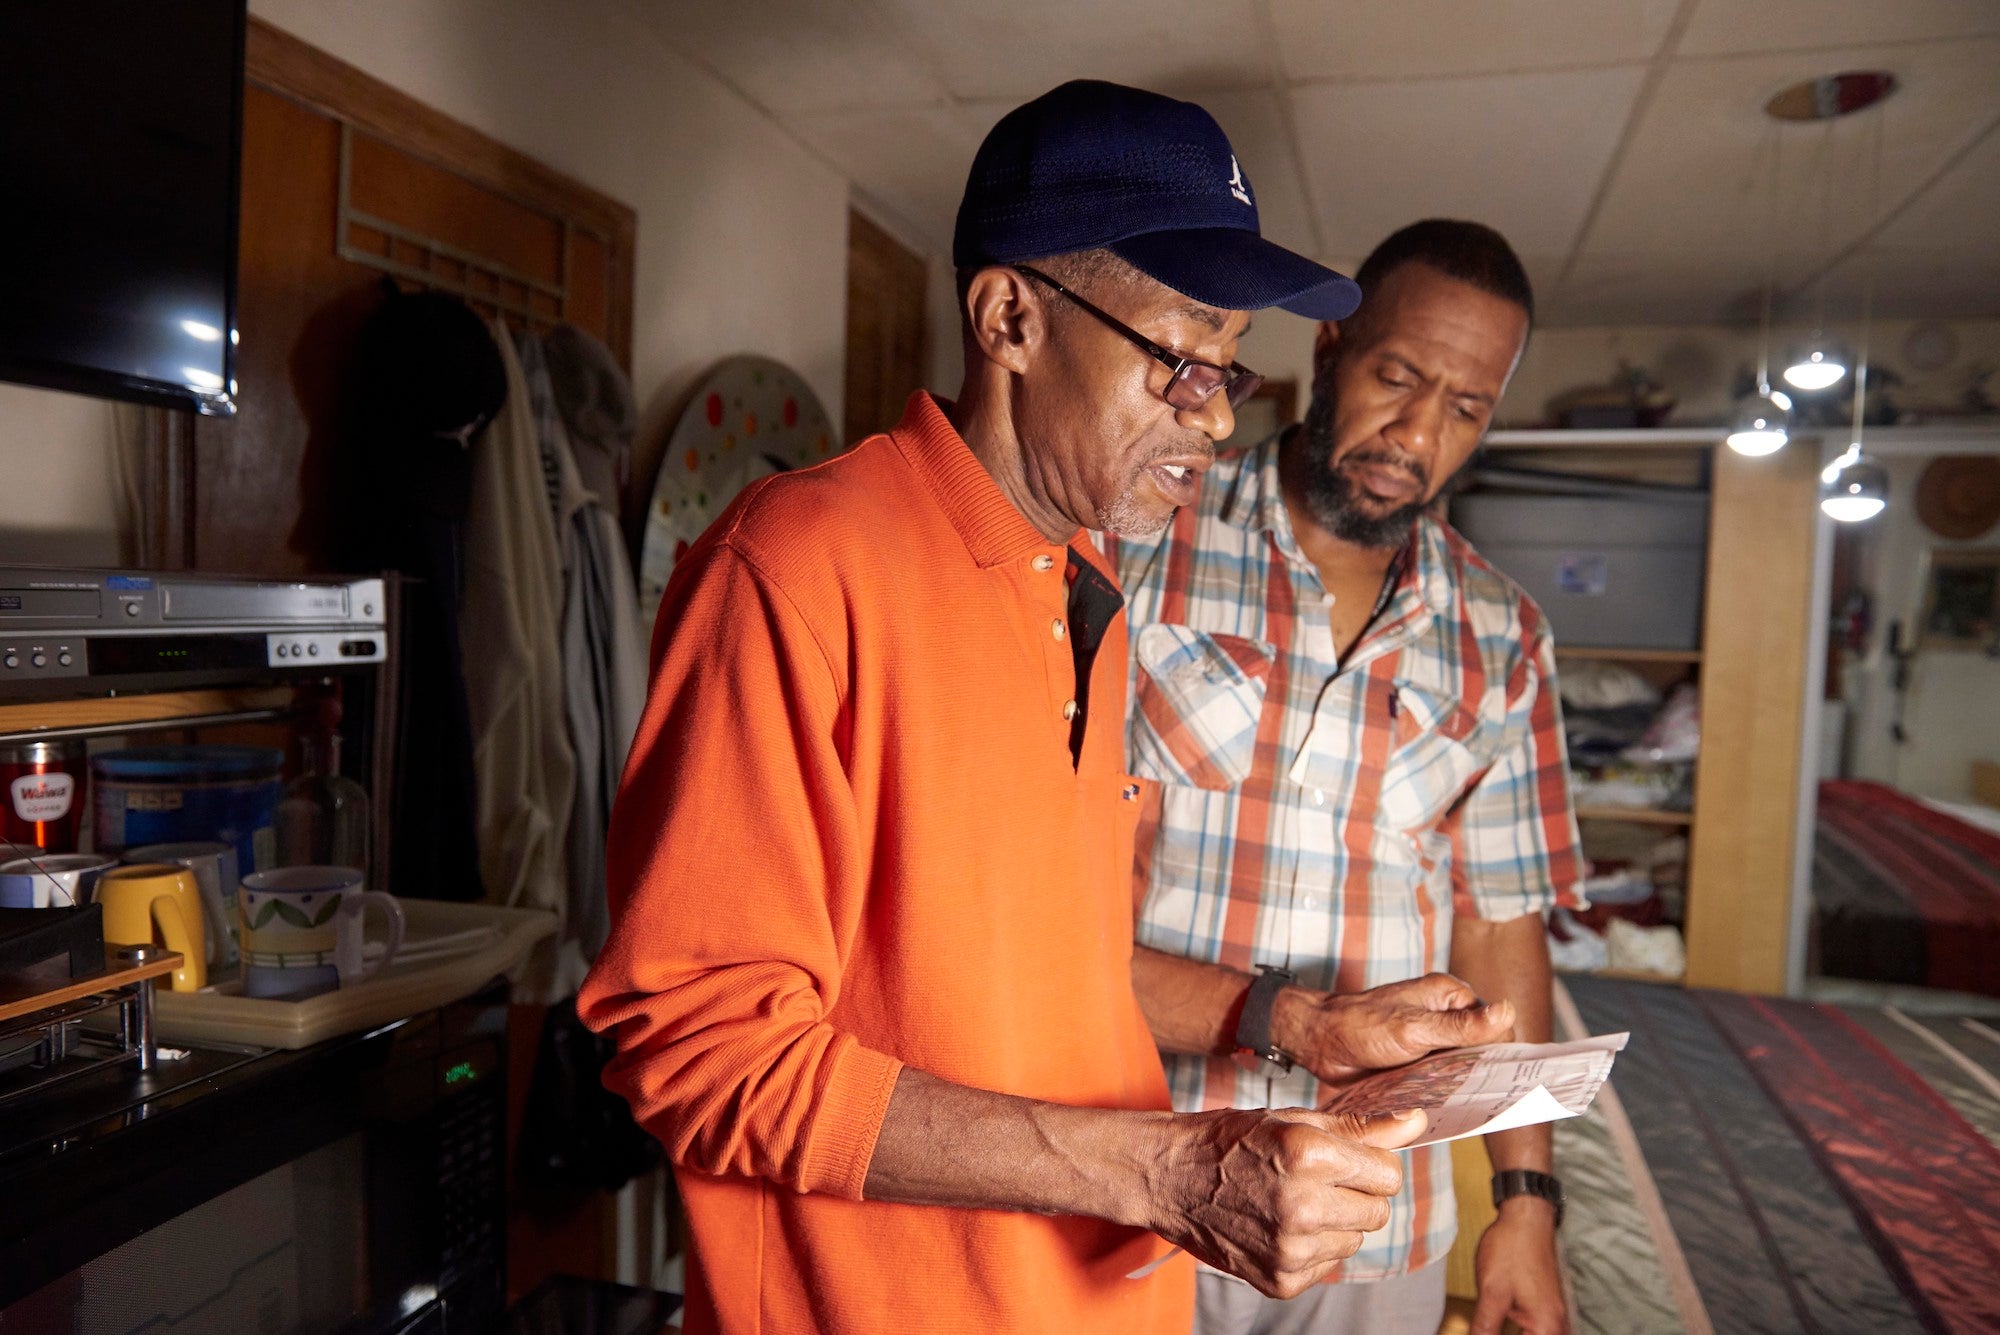 Walter Briggs (right) shows community health worker Orson Brown (left) a high utility bill during a home visit